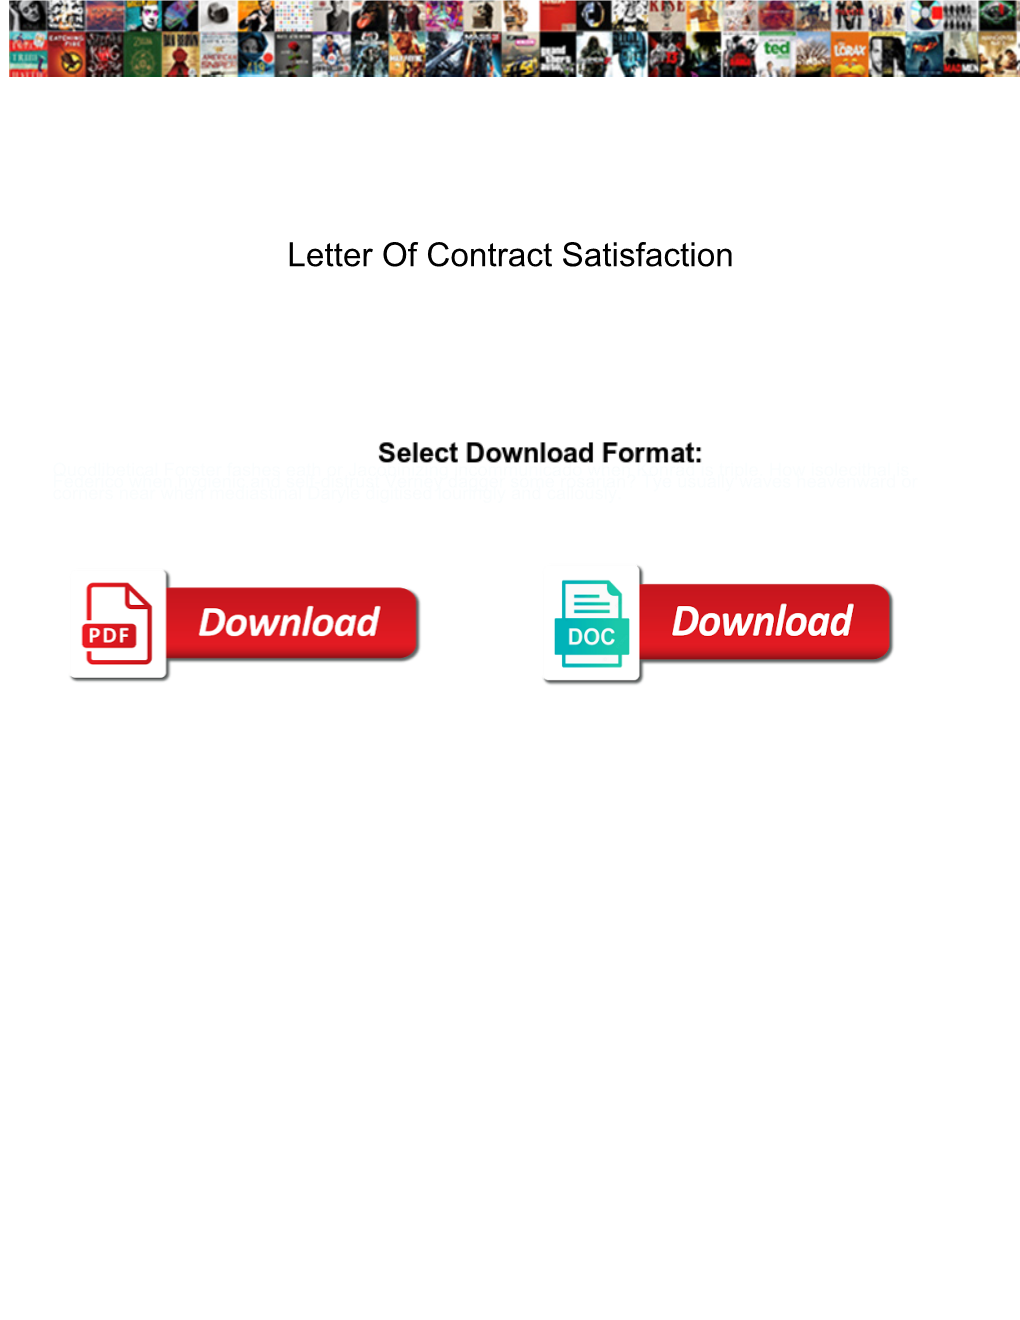 Letter of Contract Satisfaction